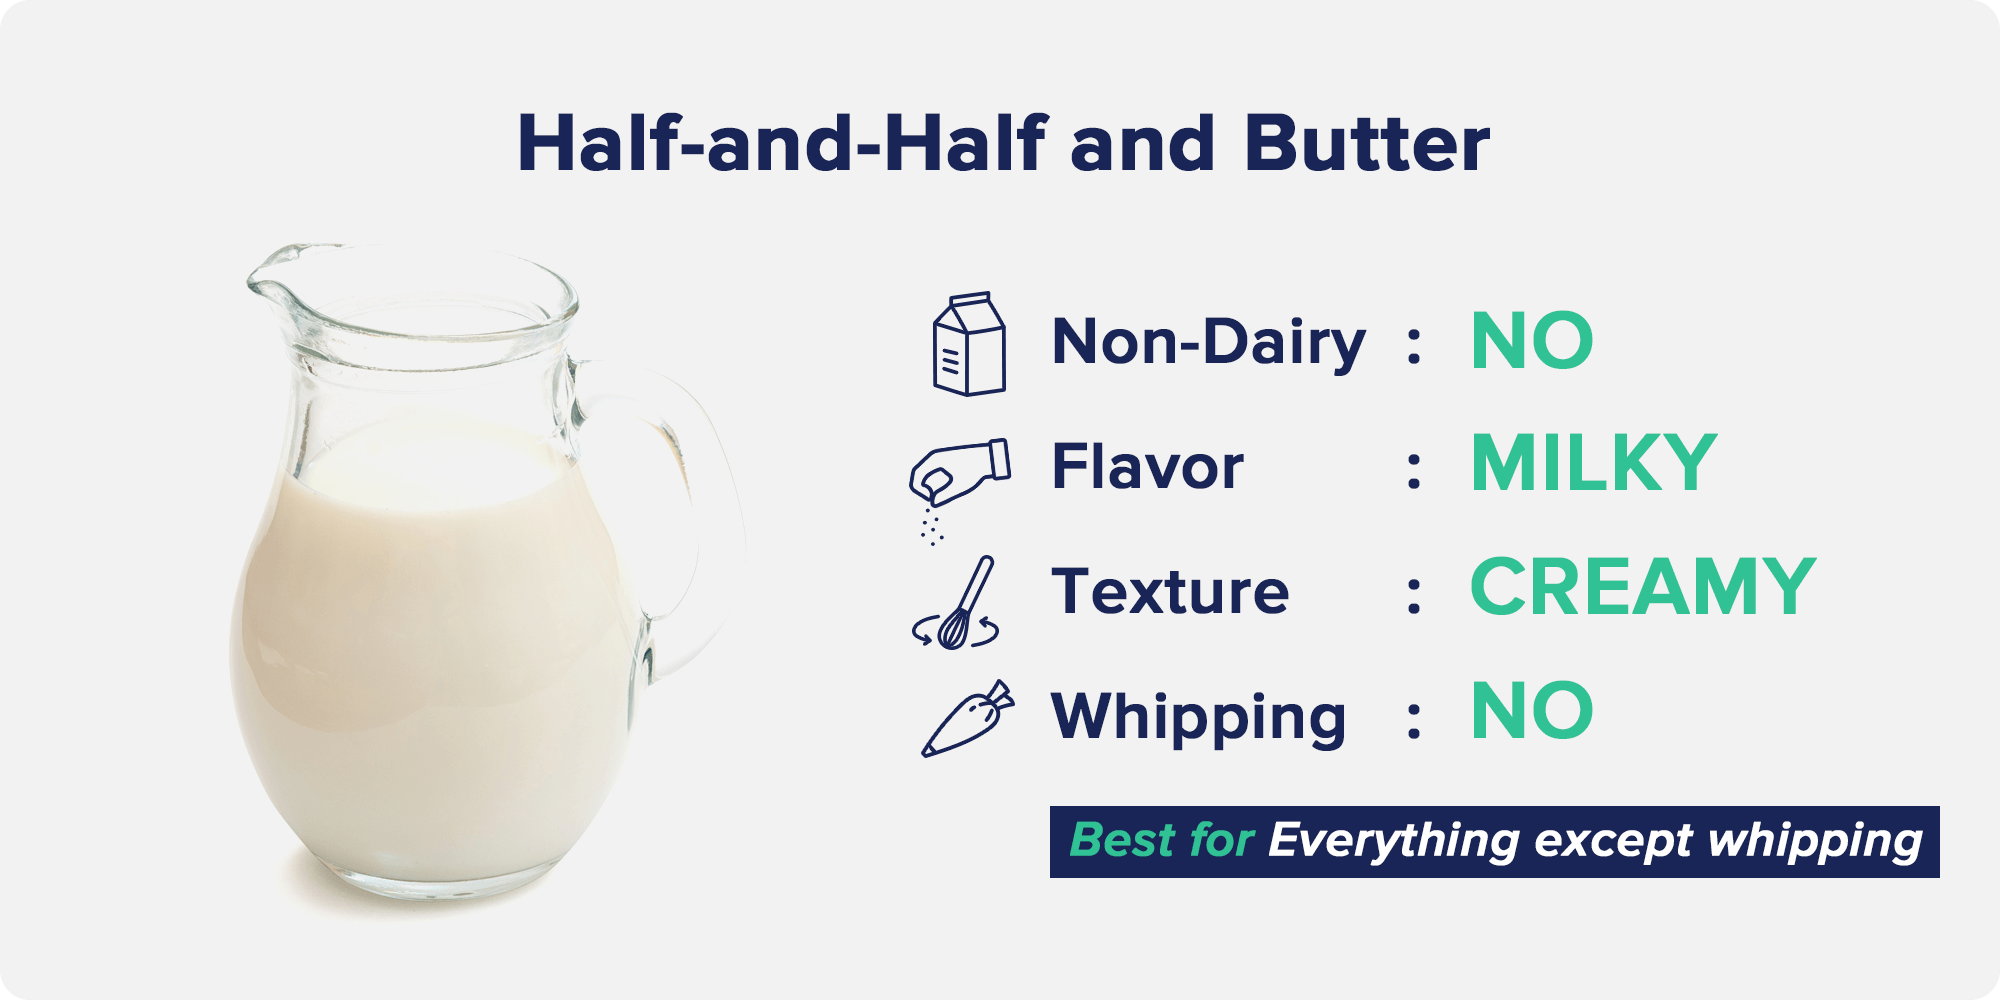 half-and-half and butter